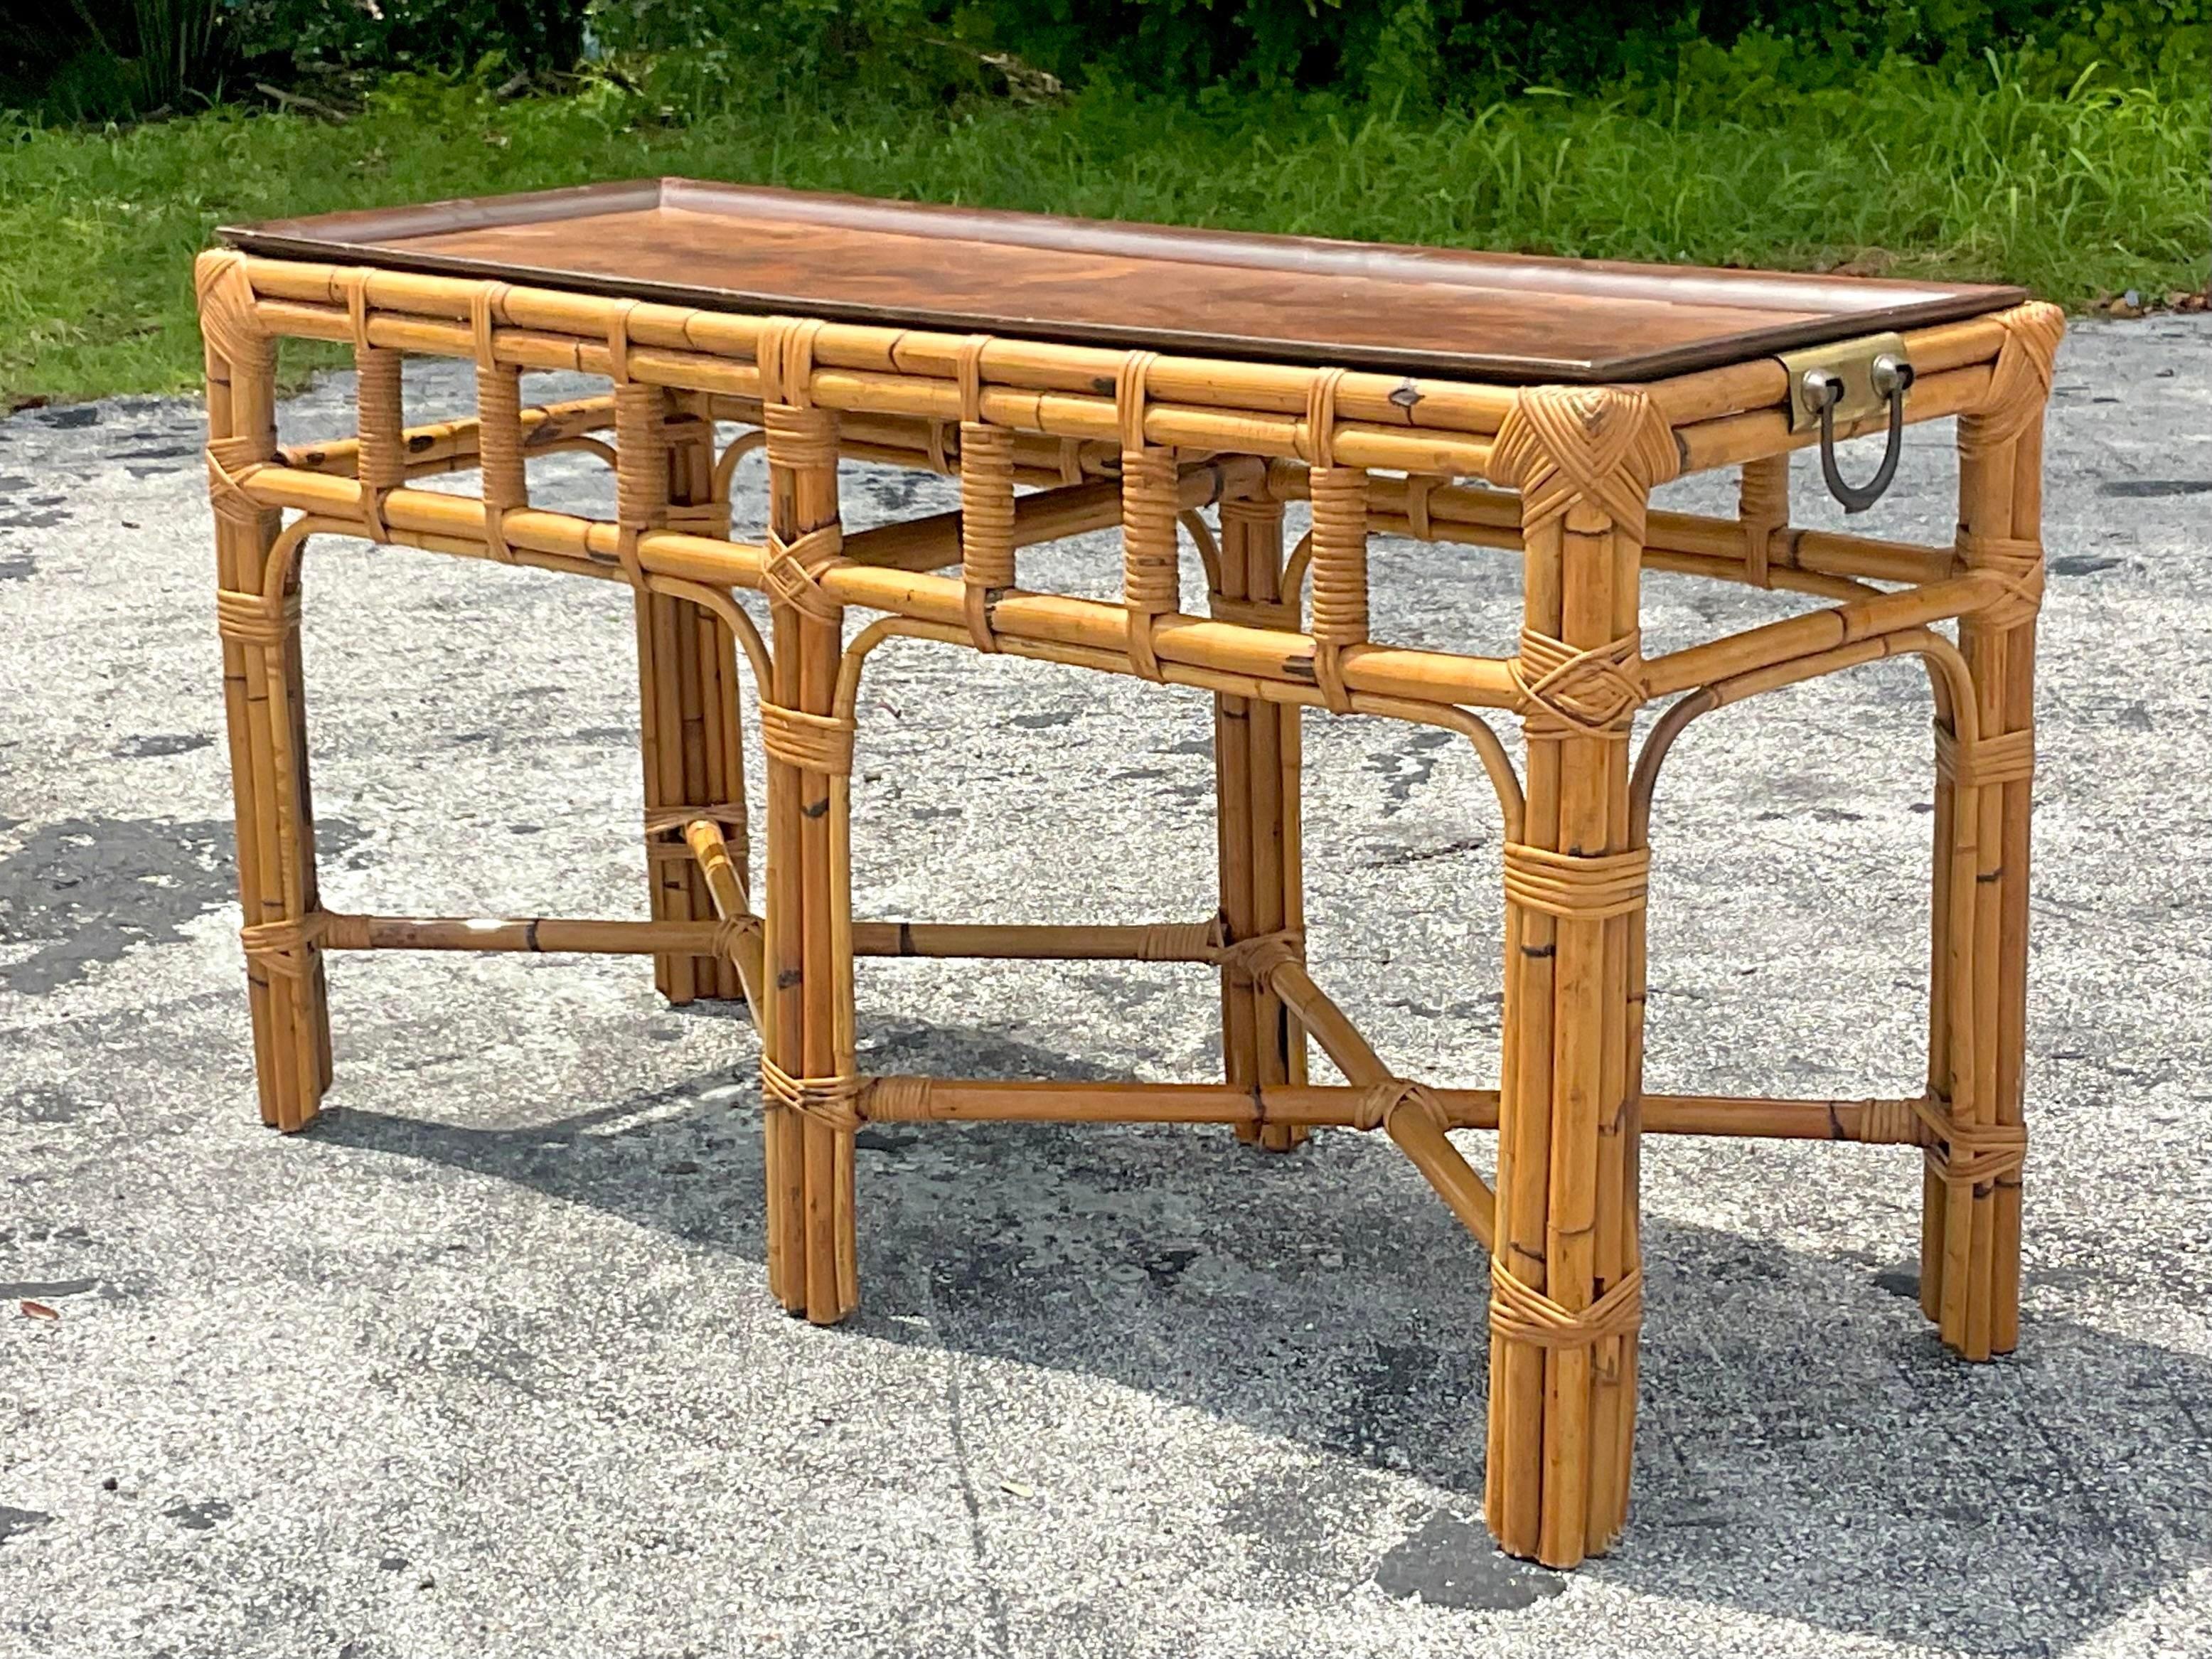 A fabulous vintage Coastal console table. Chic stacked rattan with an inlay Burl wood tray. Beautiful brass hardware on the ends. Acquired from a Miami estate.